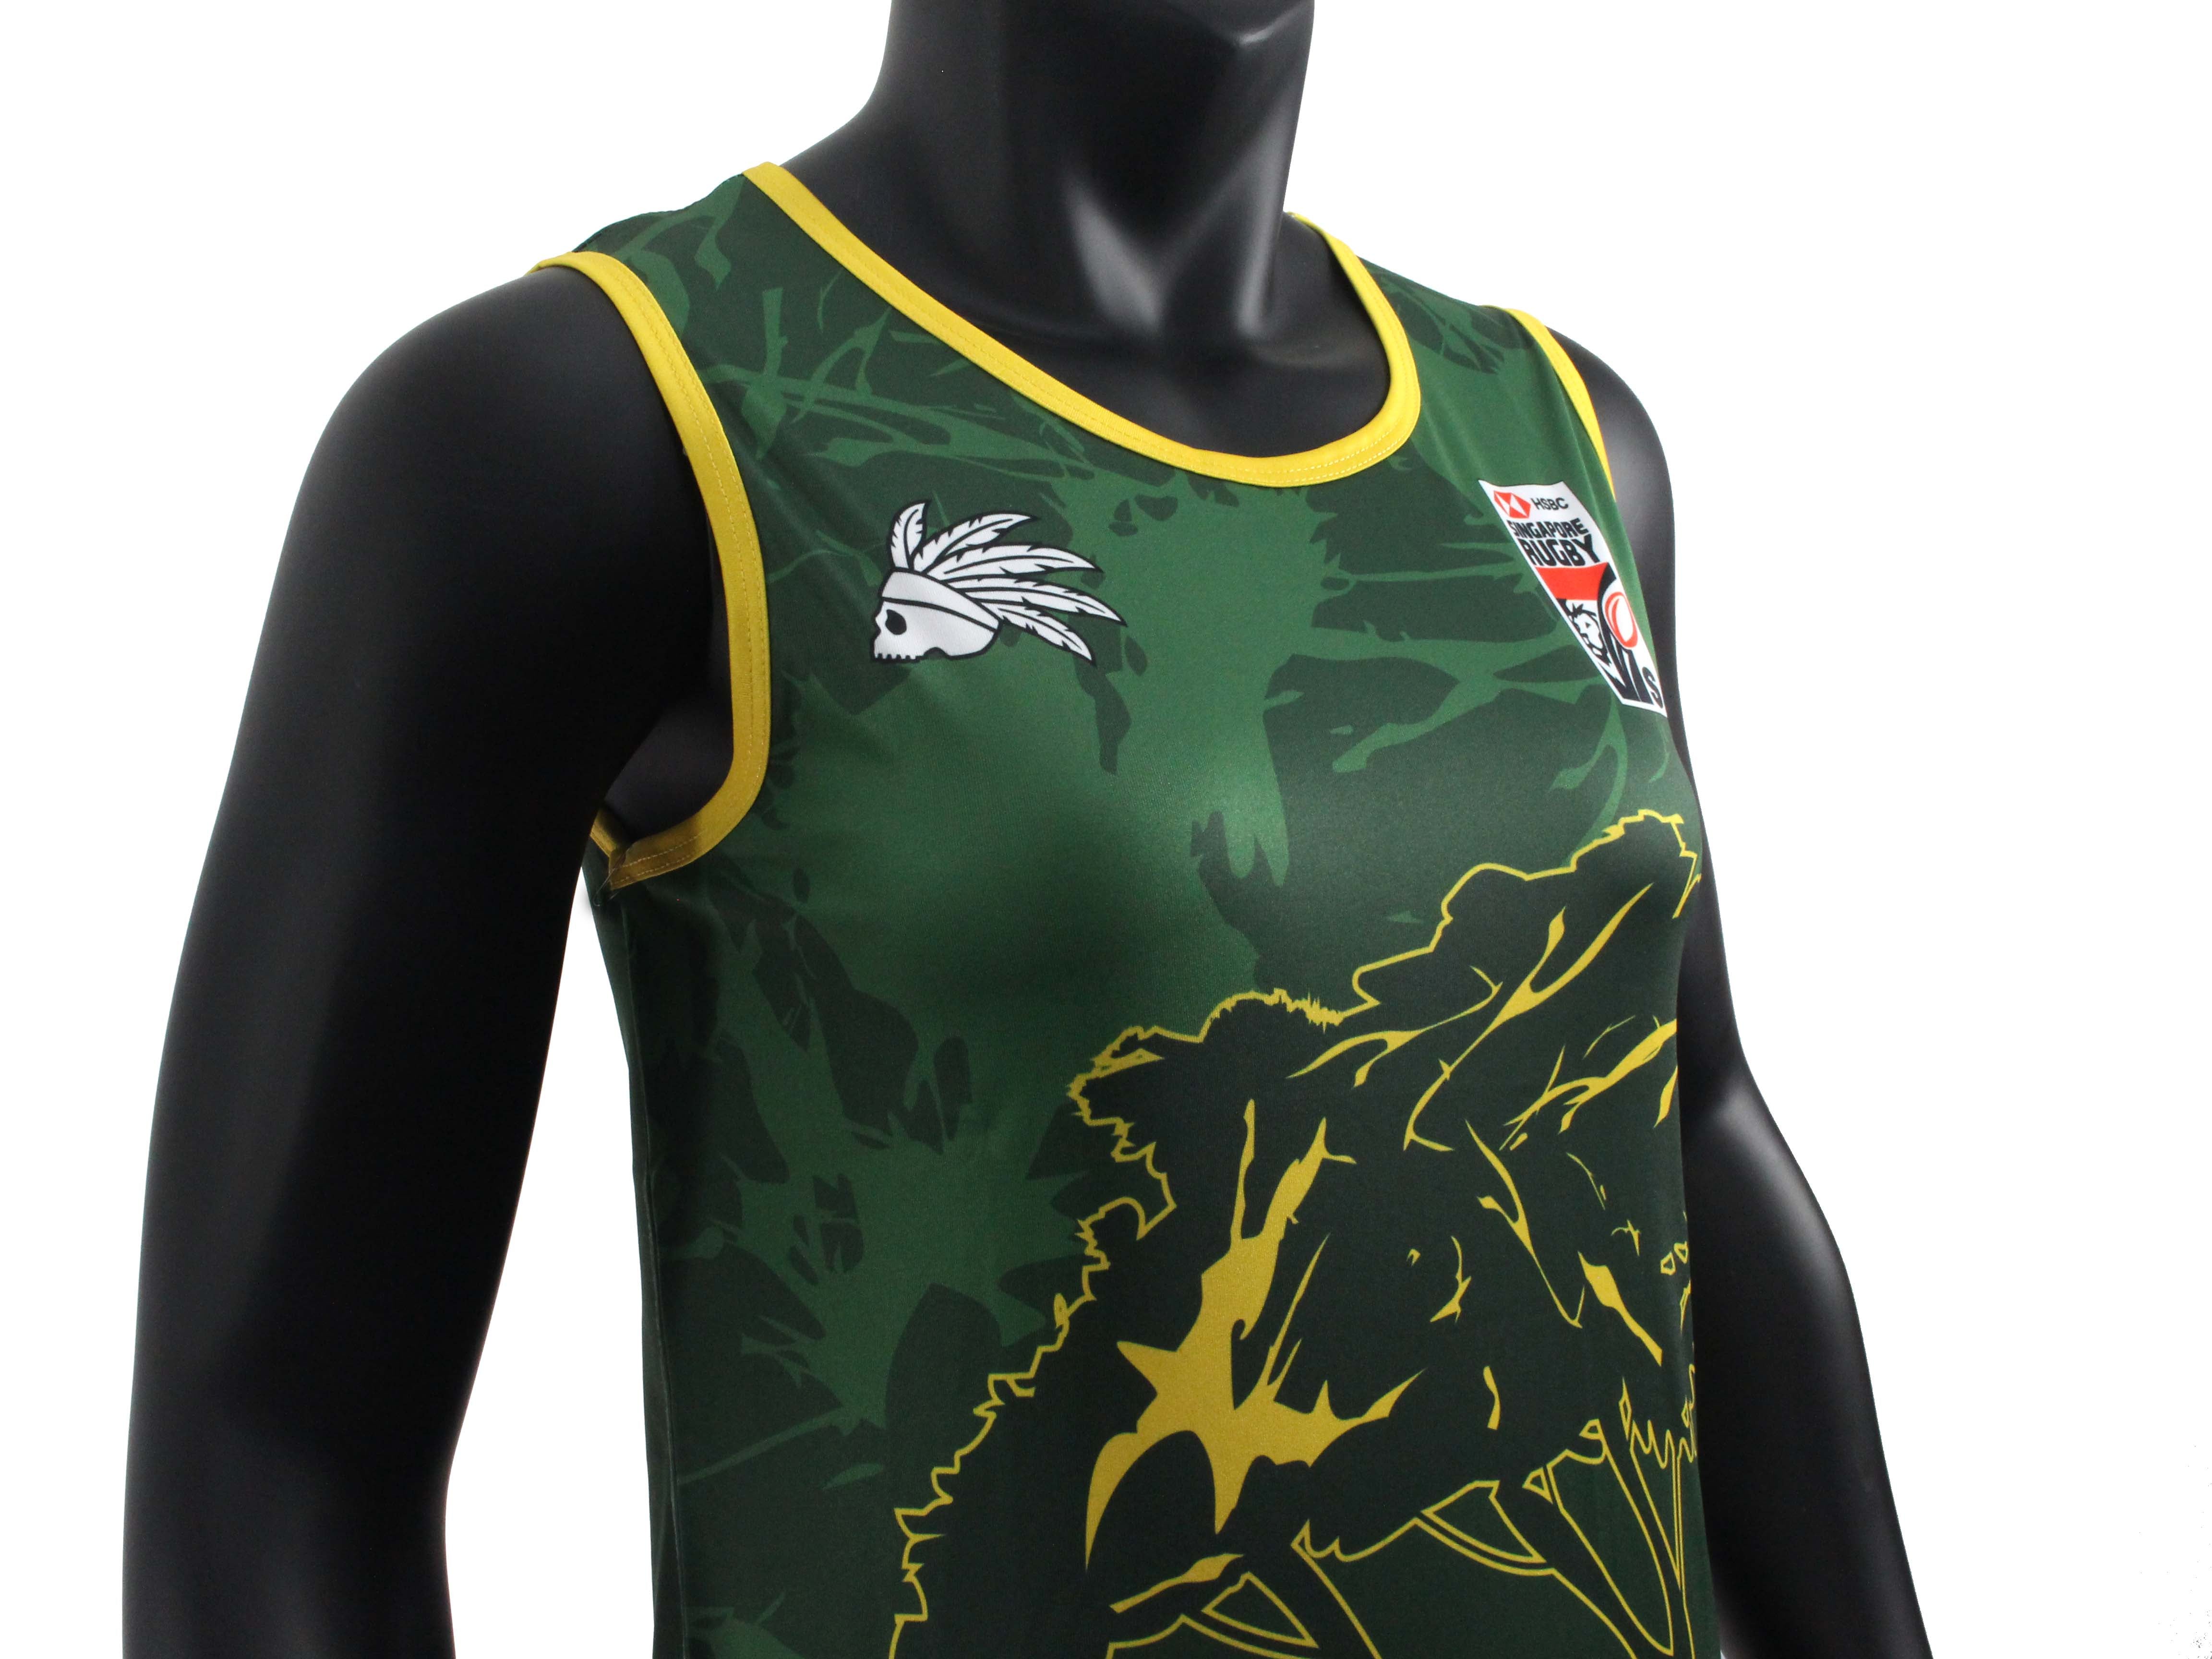 SOUTH AFRICA RUGBY SINGLET